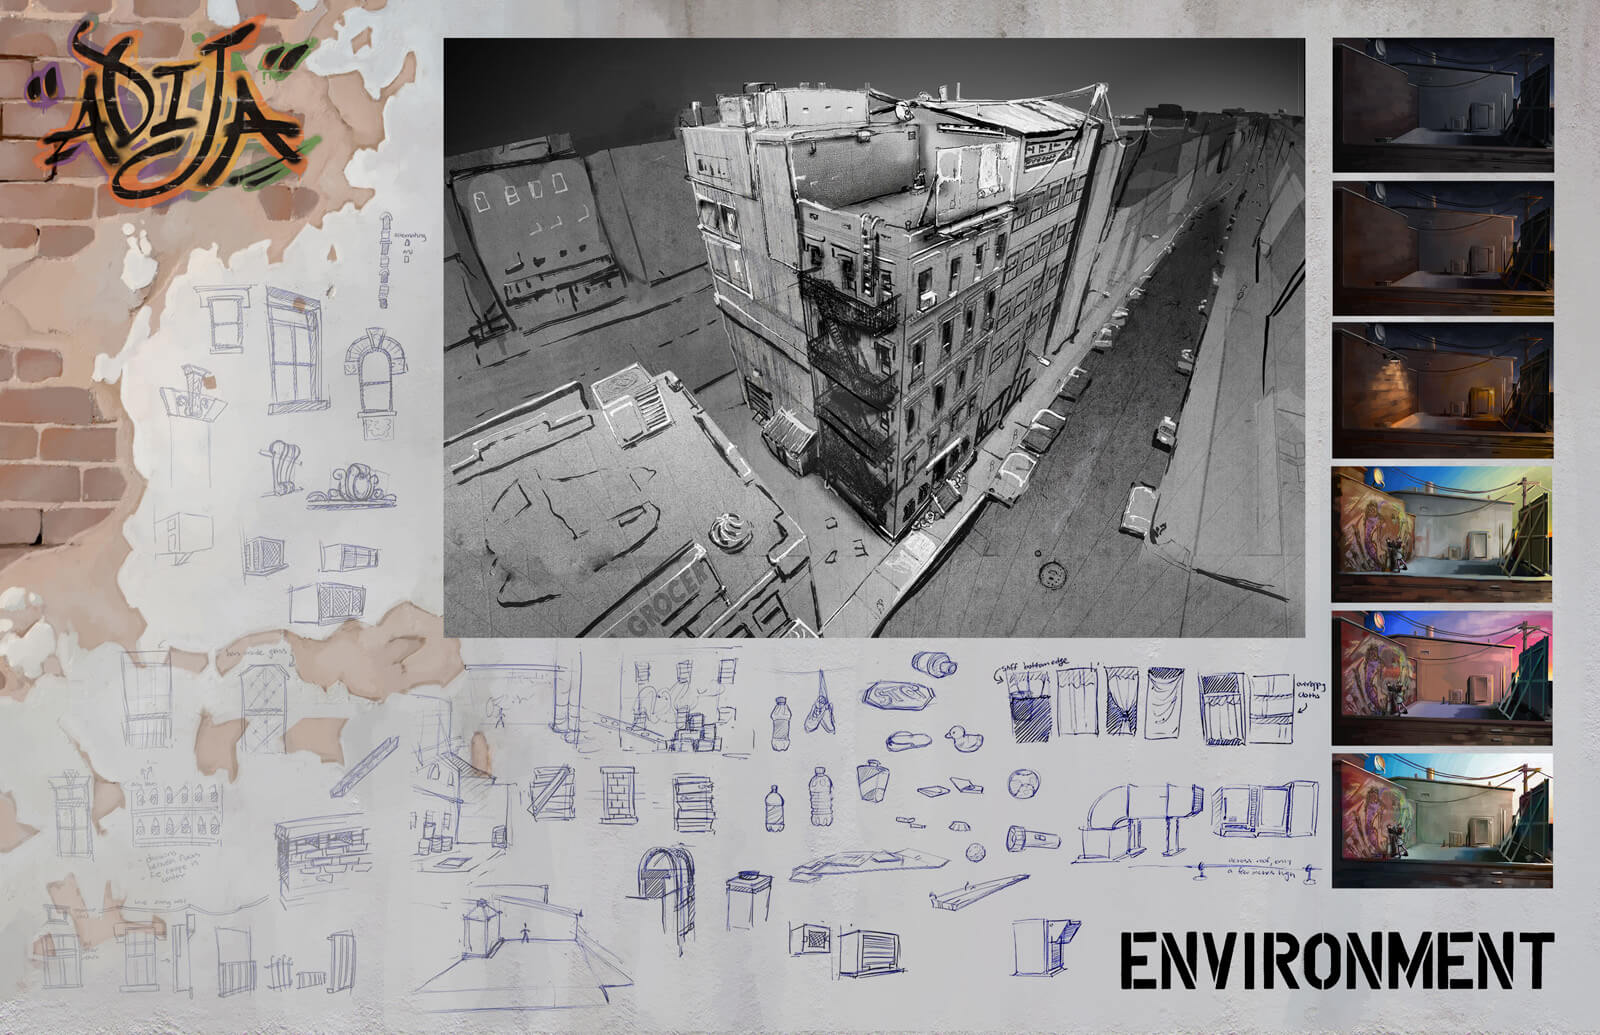 Environmental design sheet showing rough sketches of the apartment building exterior seen in the film Adija